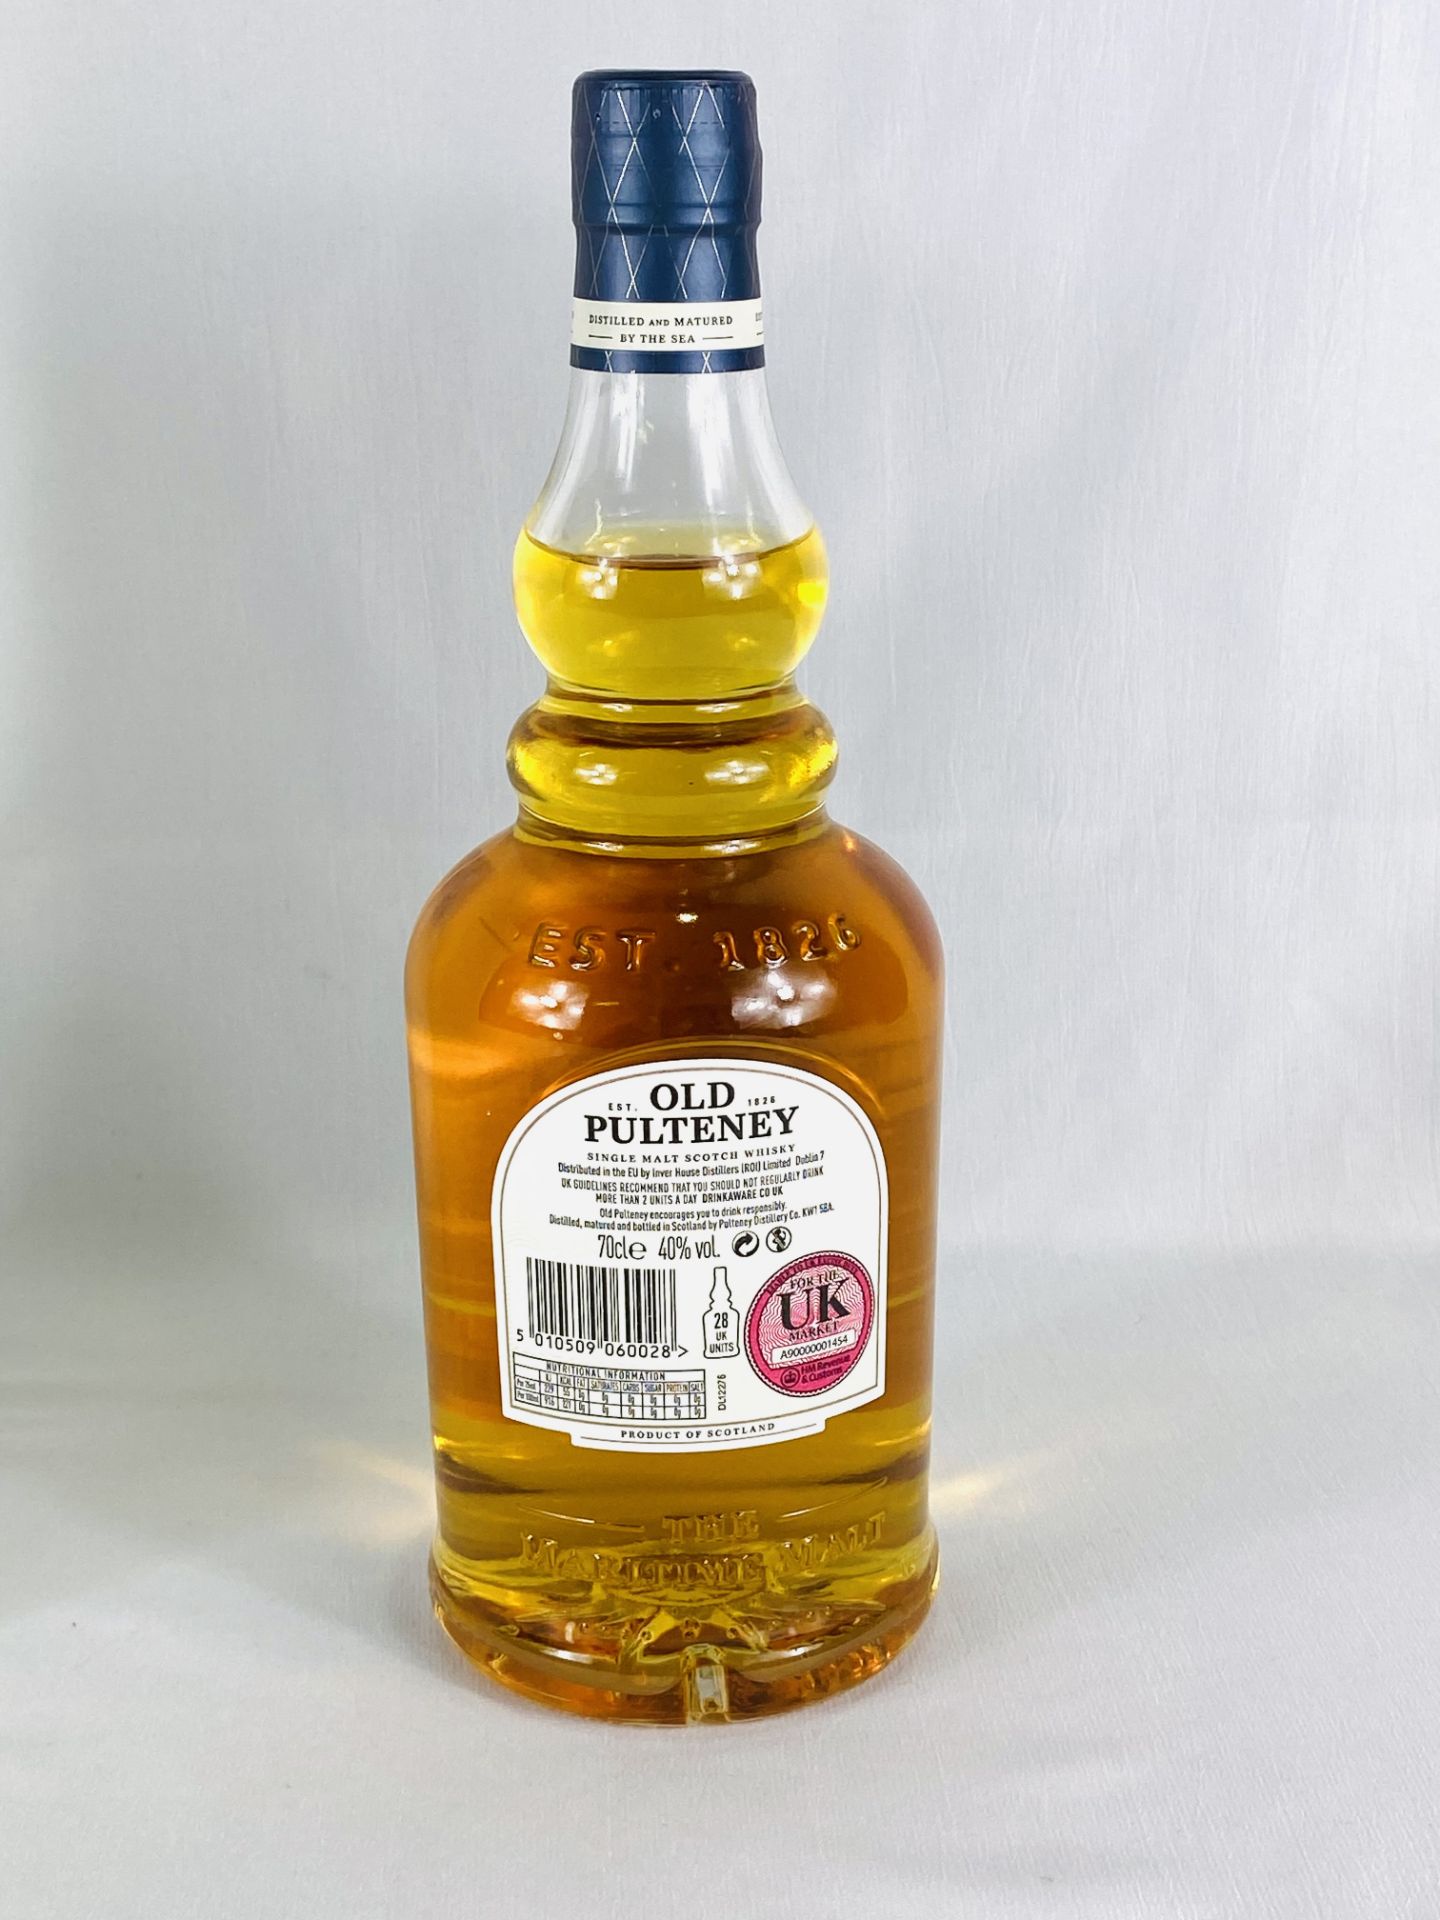 70cl bottle of Old Pulteney Scotch whisky - Image 2 of 3